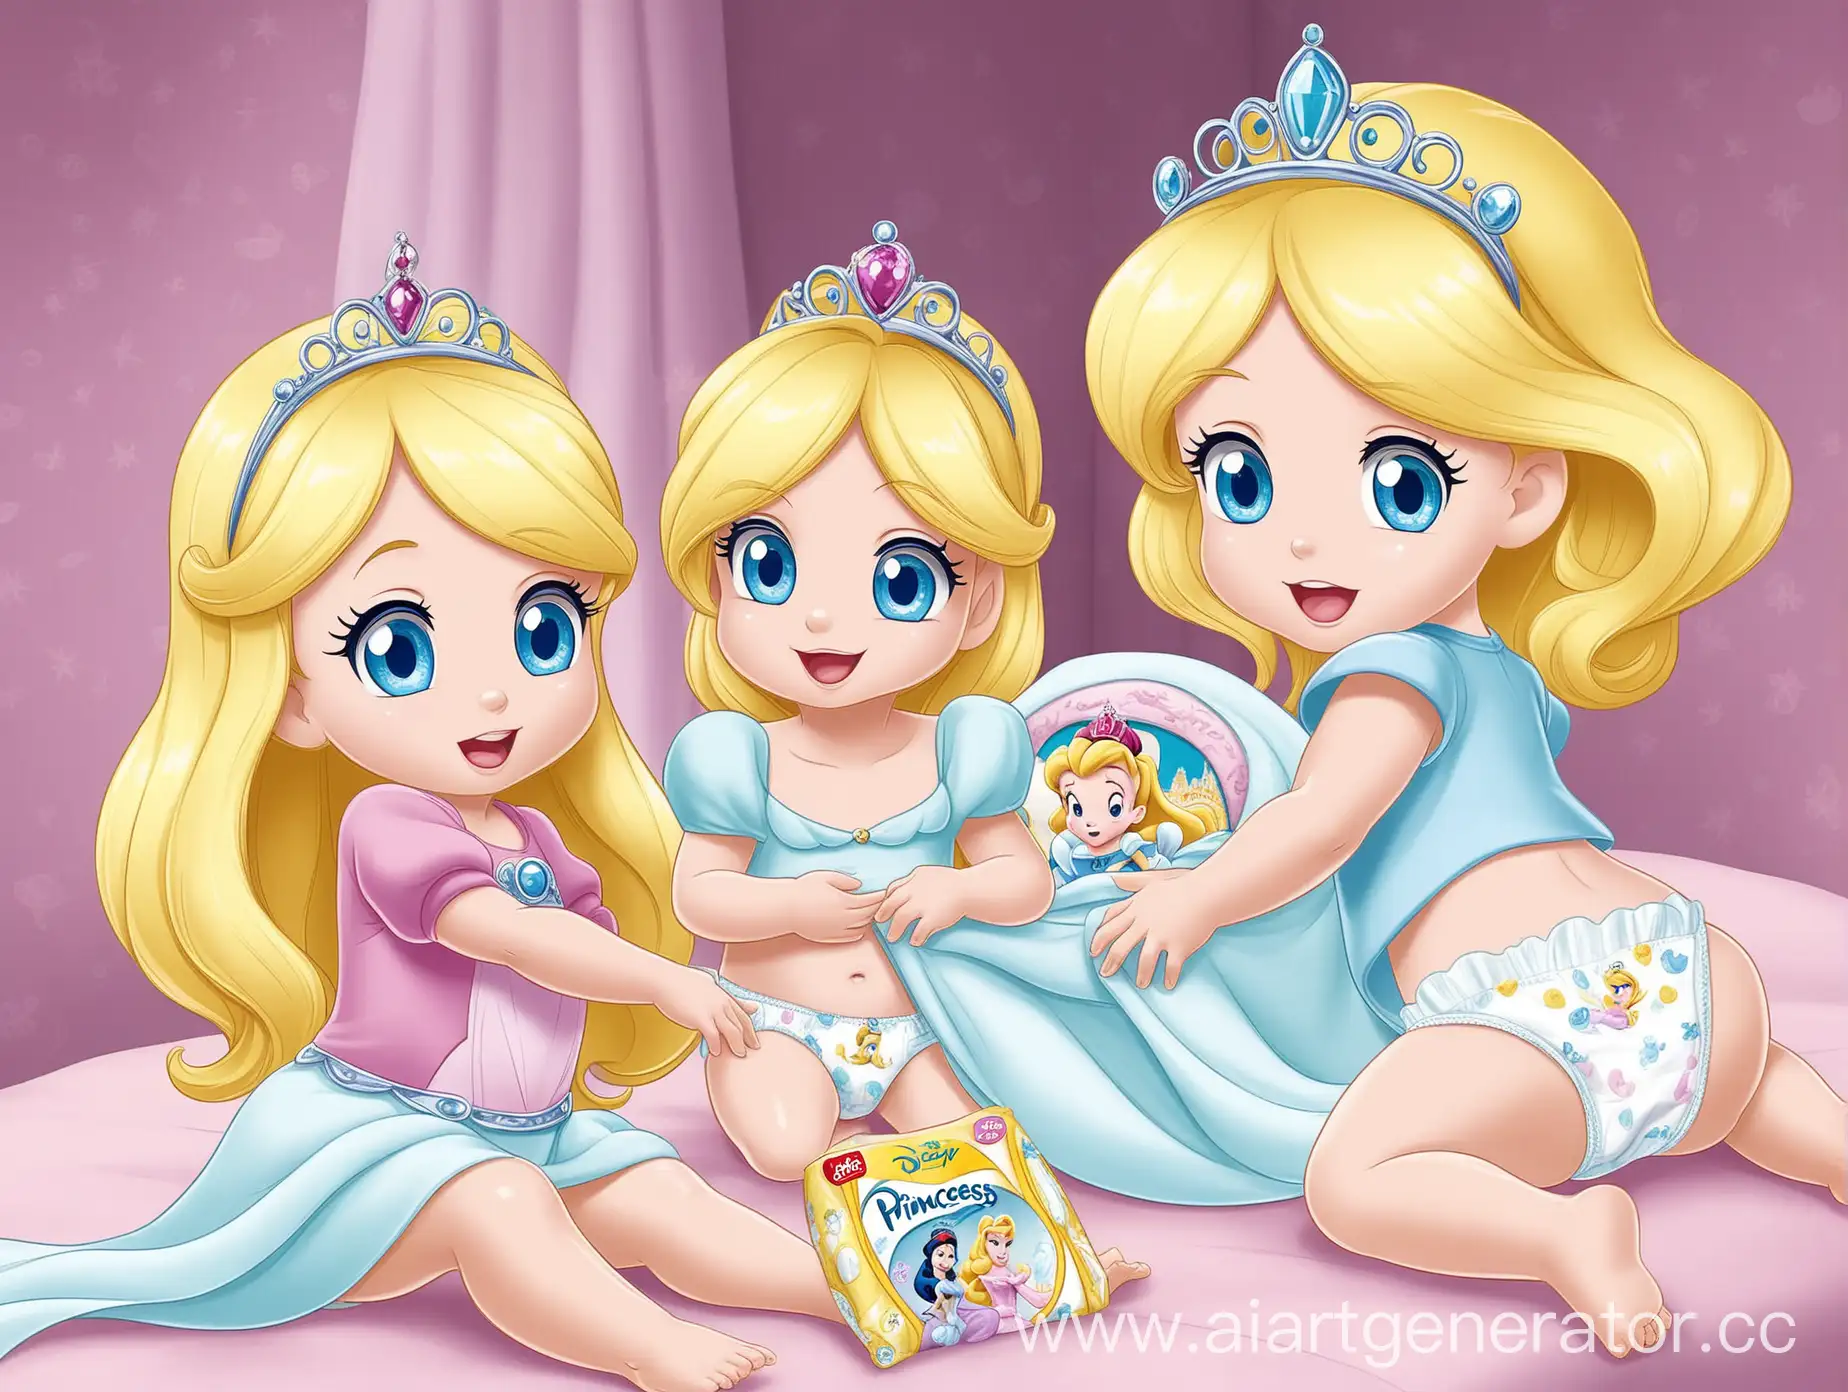 Disney-Princesses-in-Pampers-Playful-Diaper-Fun-with-Iconic-Characters